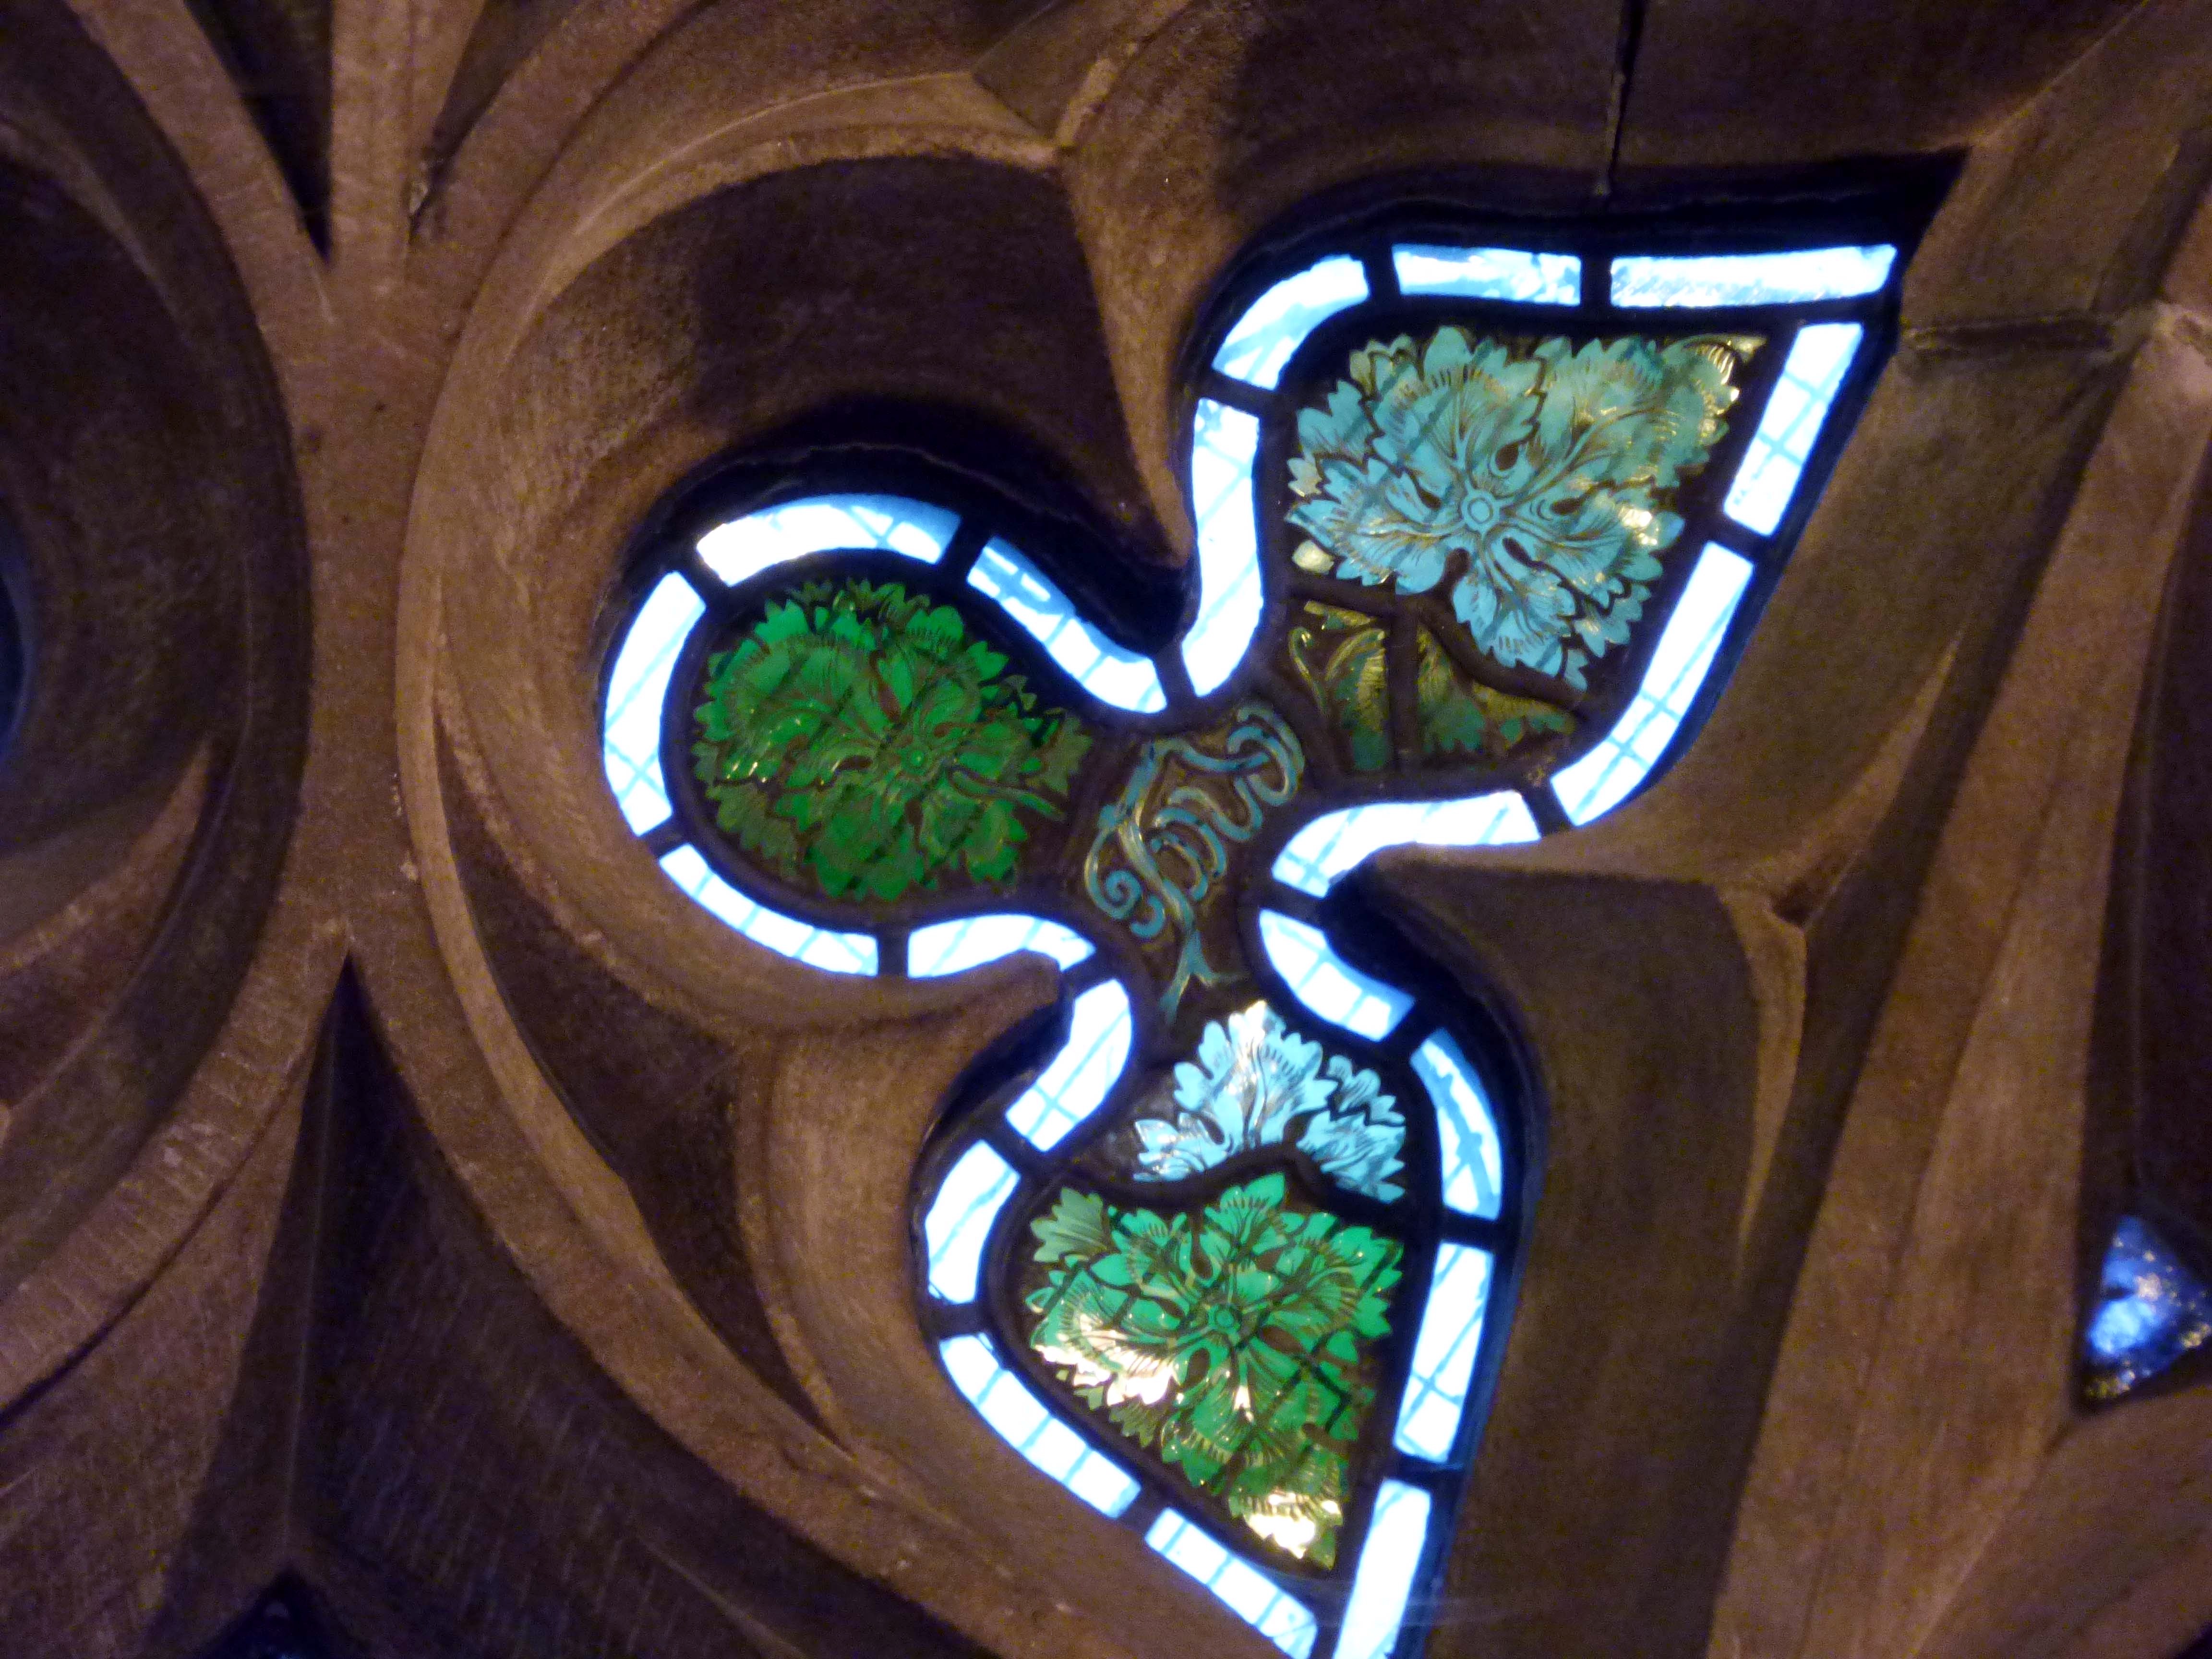 stained glass windows in All Hallows Church, Liverpool, Feb 2022